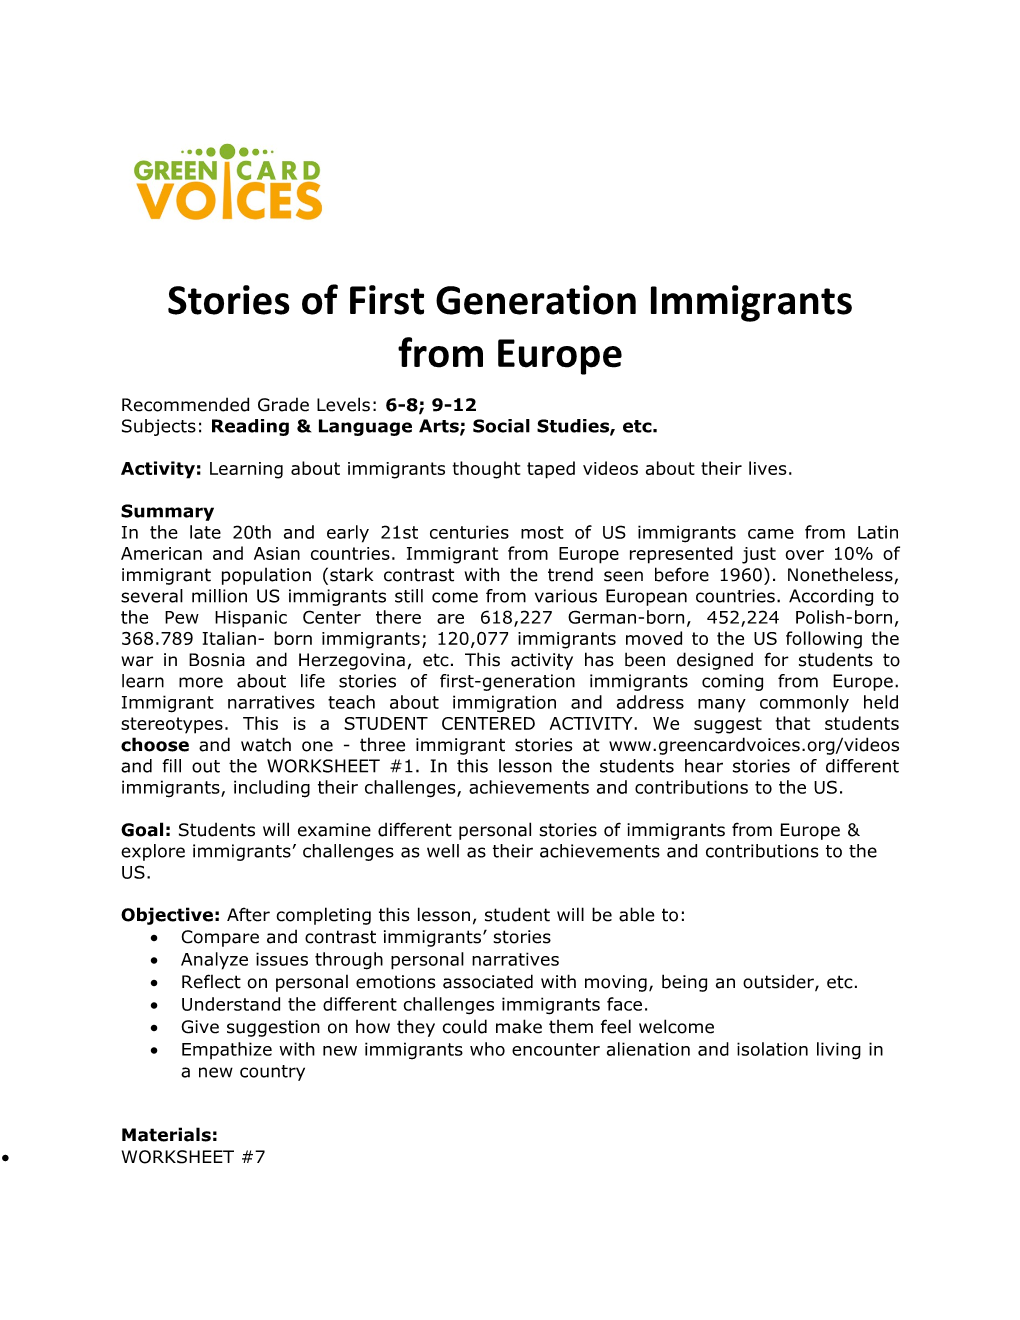 Stories of First Generation Immigrants from Europe